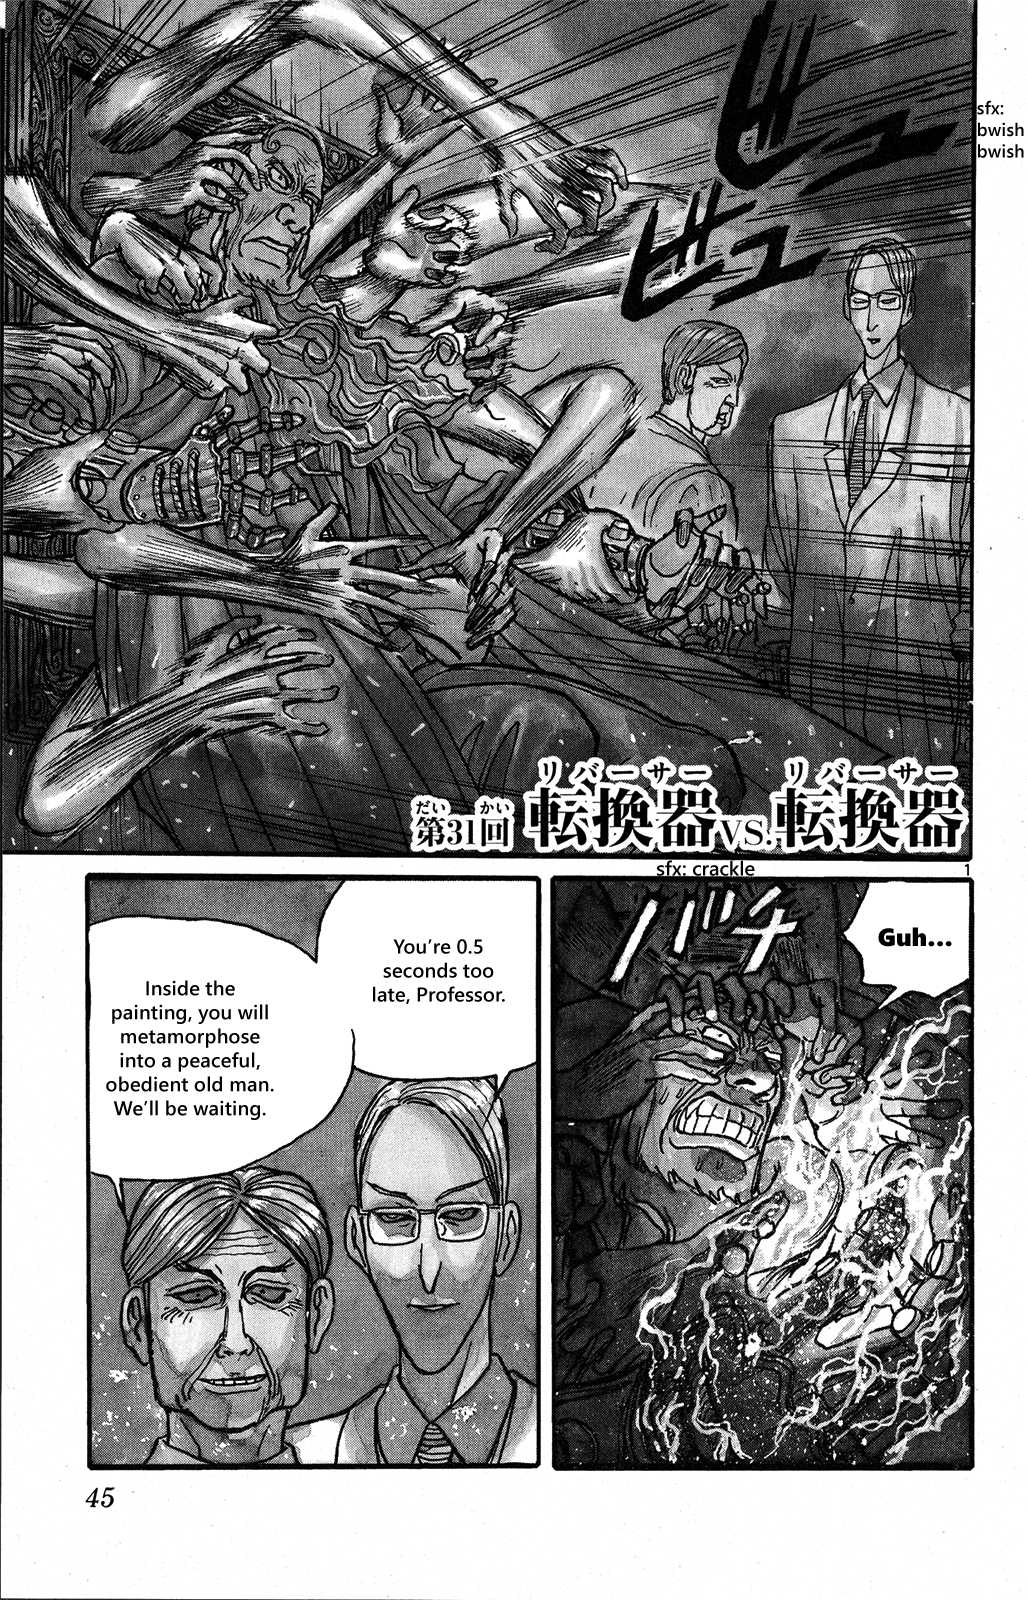 Souboutei Must Be Destroyed - Page 1